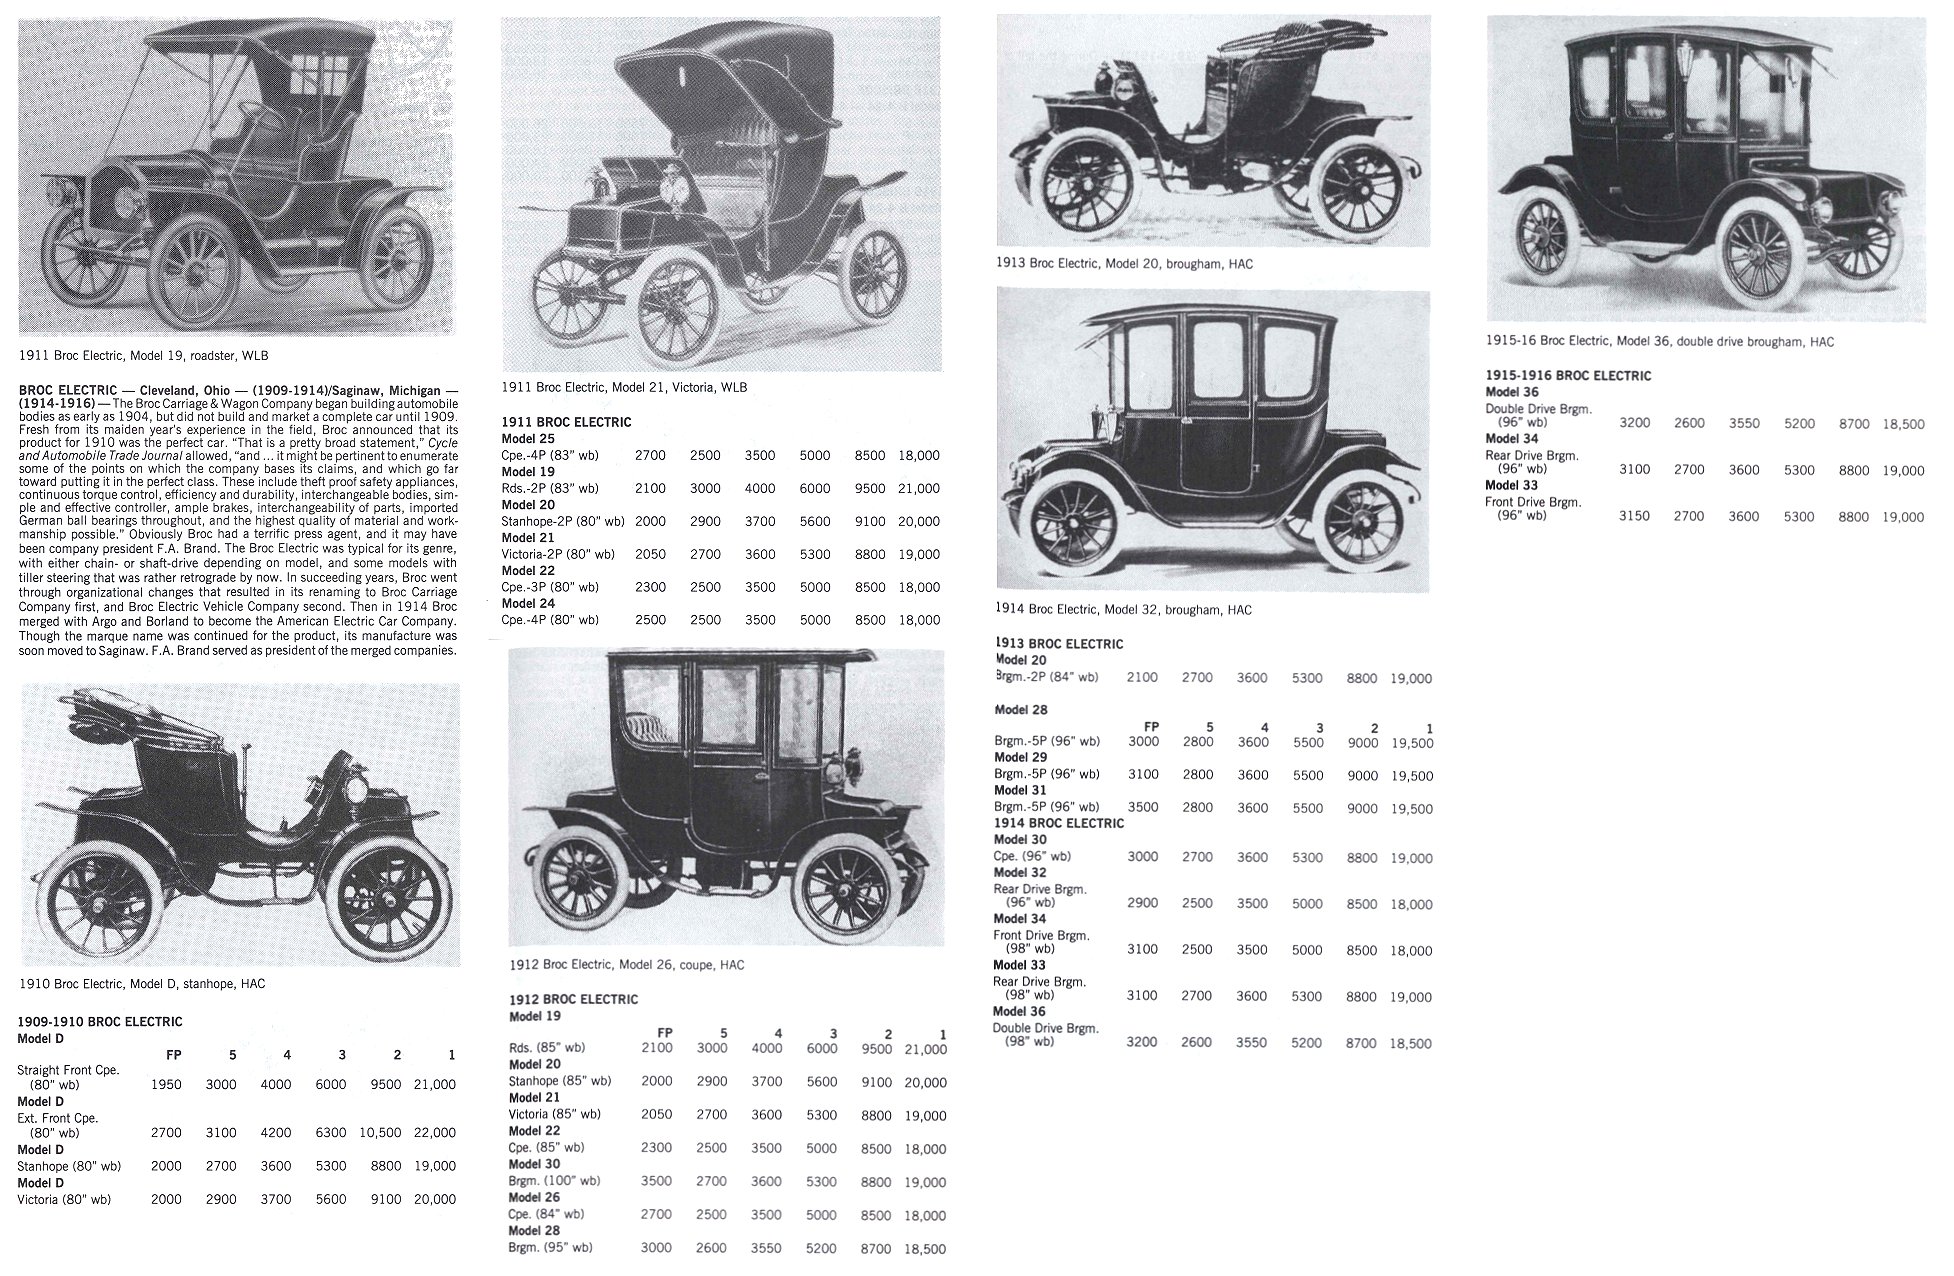 BROC Electric Cleveland, Ohio 1909-1914 BROC Electric Saginaw, Michigan 1914-1916 Standard Catalog of AMERICAN CARS 1805-1942 By Beverly Rae Kimes & Henry Austin Clark, Jr. Krause Publications ISBN: 0-87341-428-4 8.5″x11″ pages 150 & 151